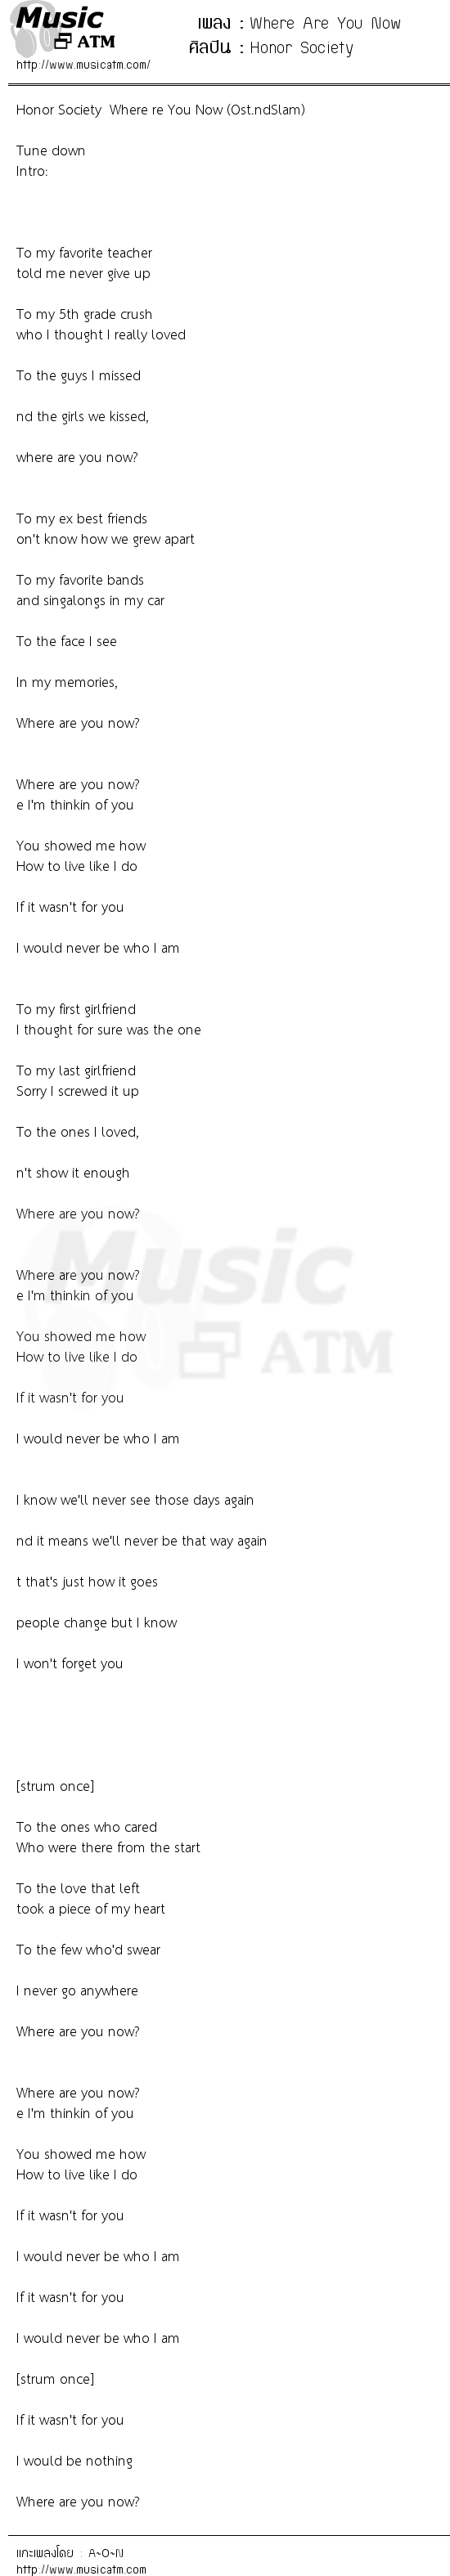 Where Are You Now | เพลงไทย